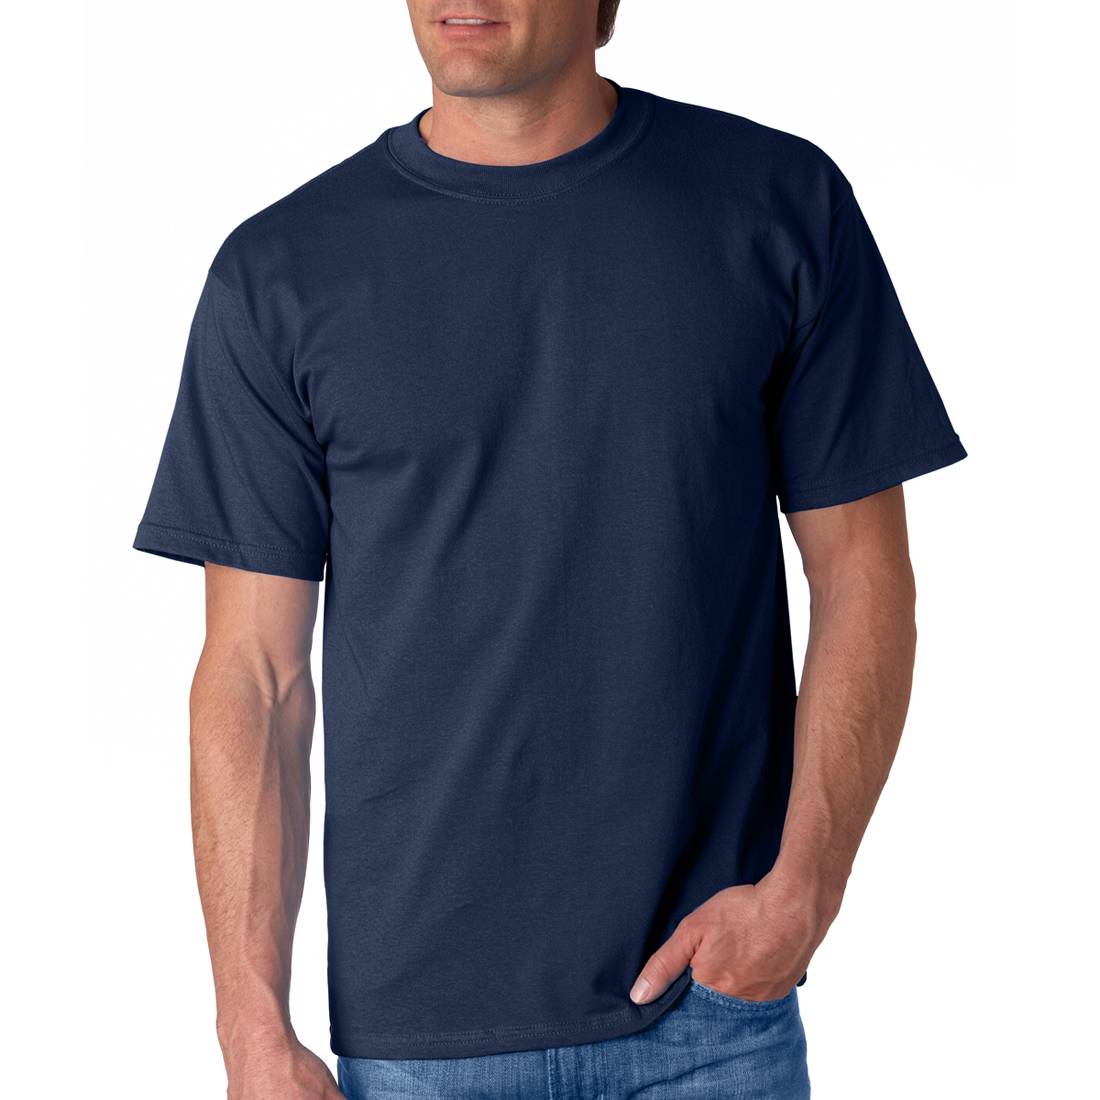 Apparel & Accessories :: T-Shirts :: Safety... It's My Job T-Shirt